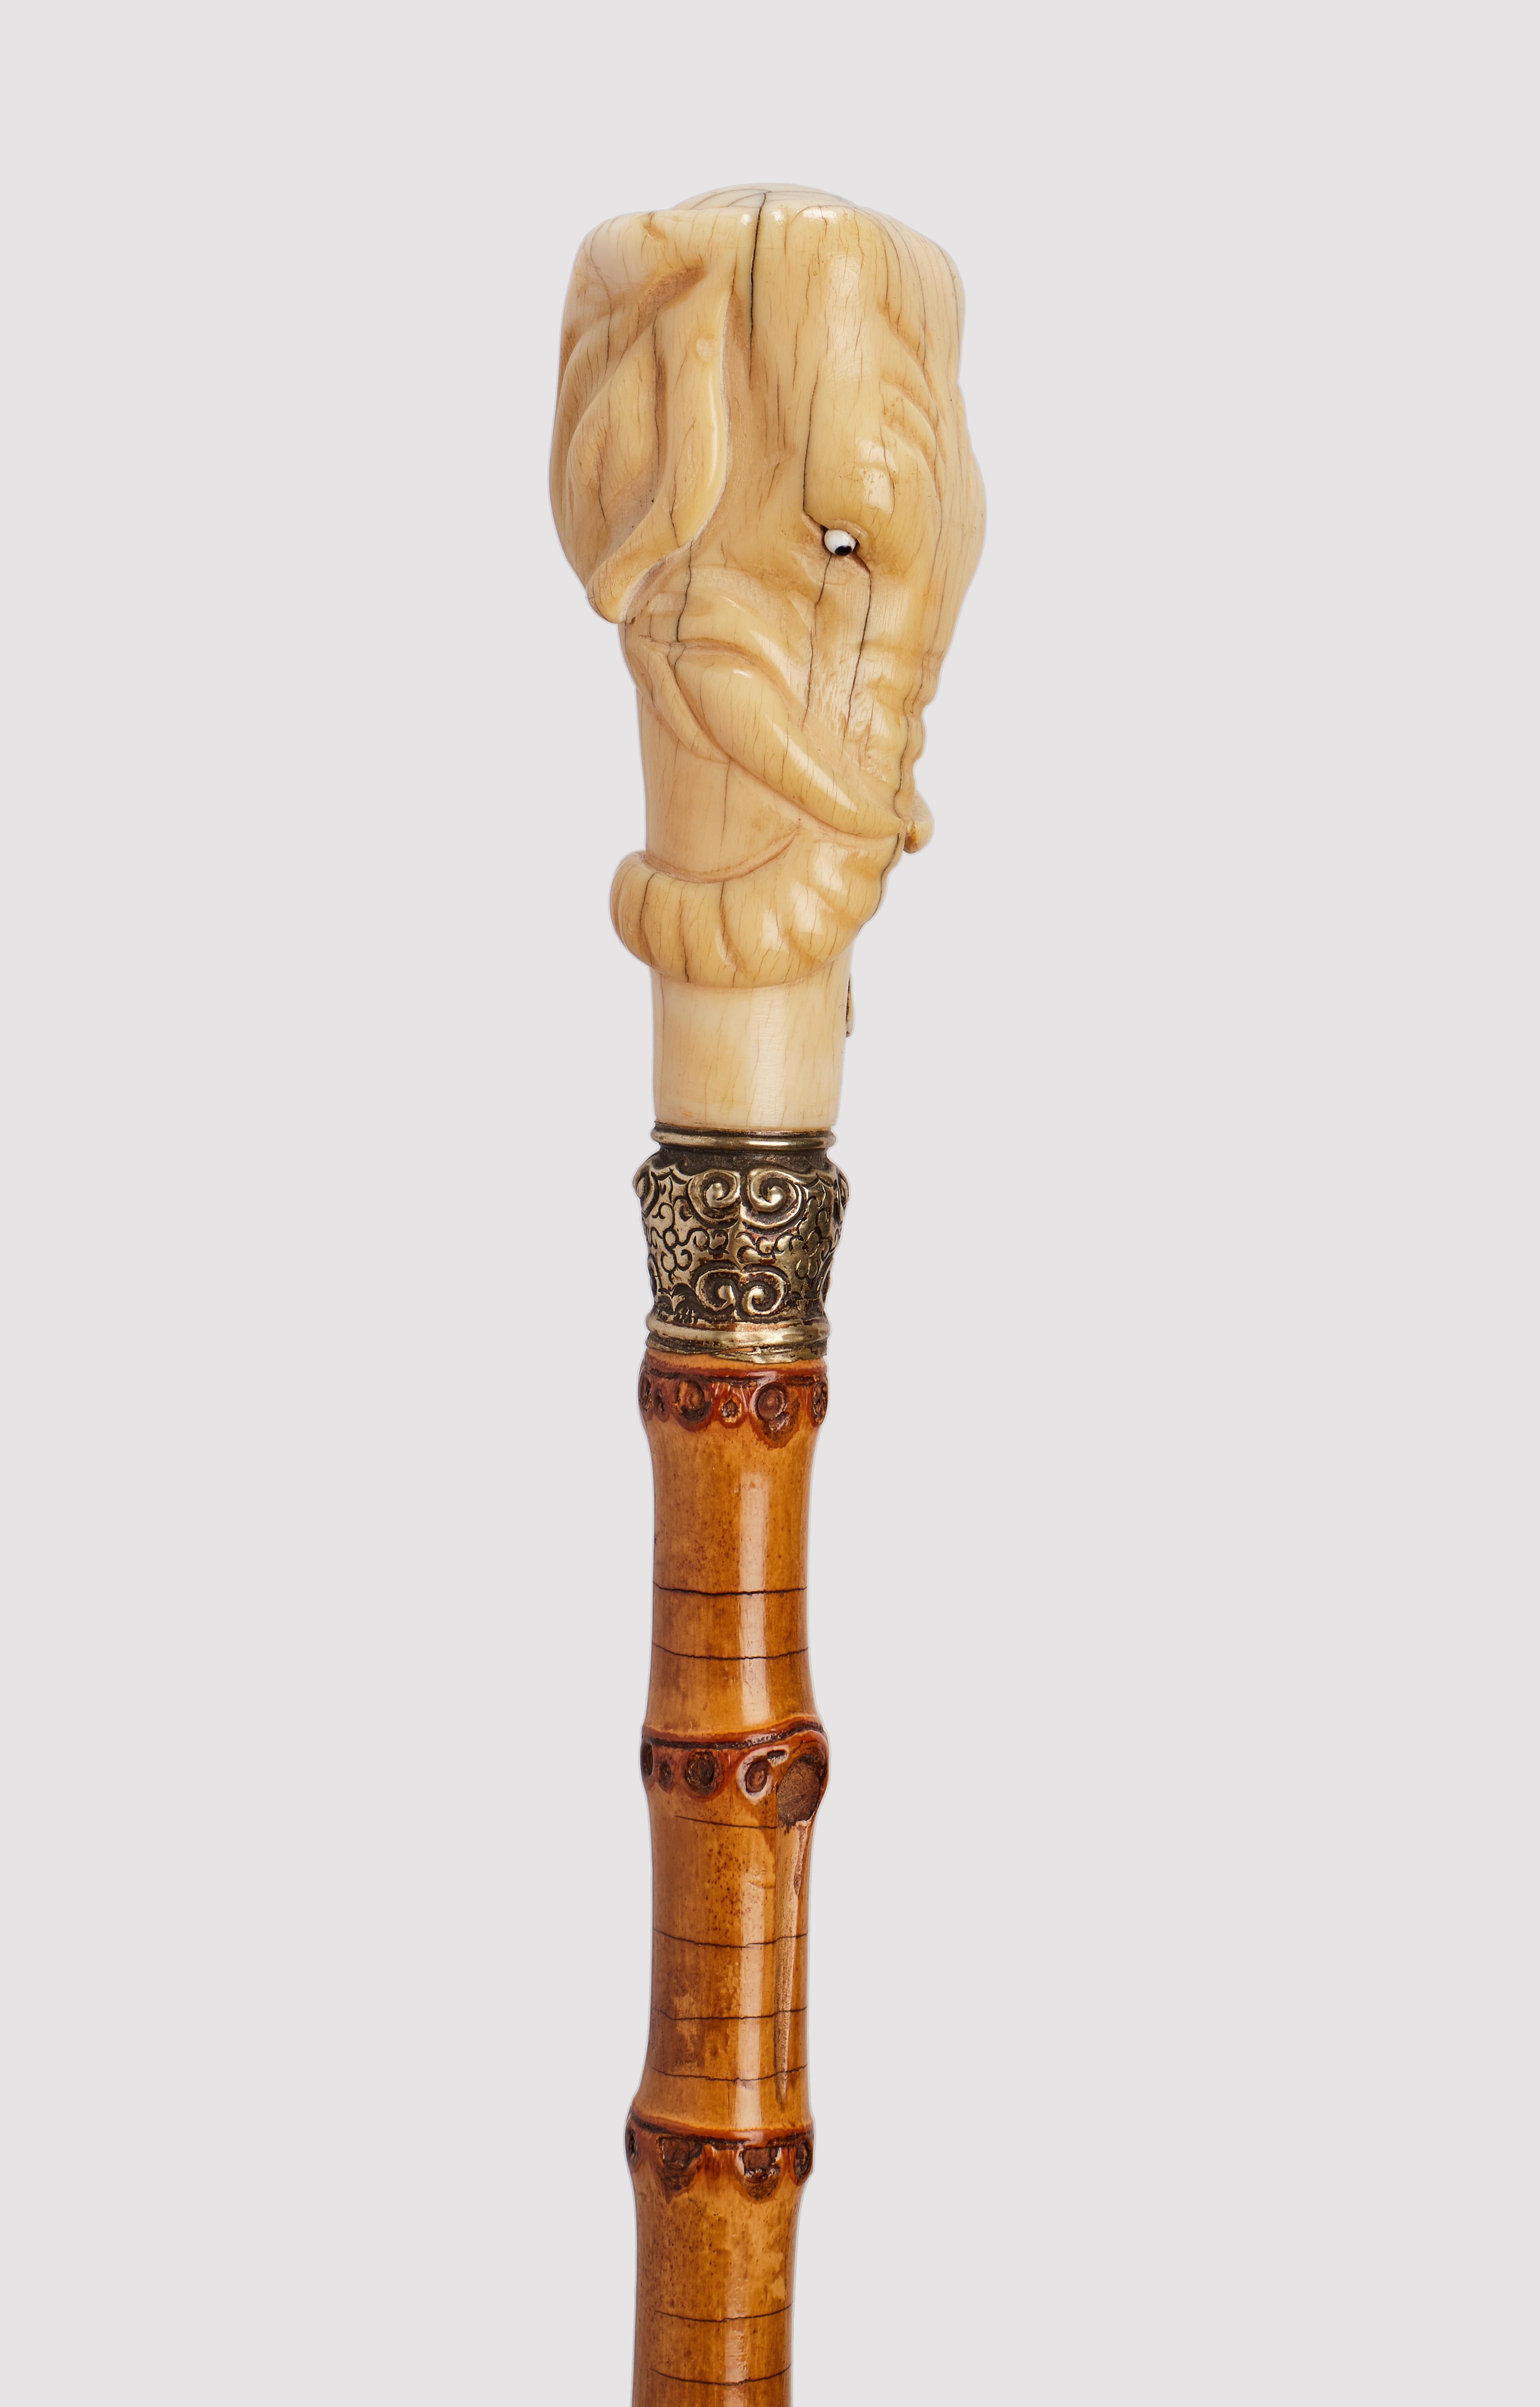 Walking stick: ivory carved handle depicting an elephant’s head, with twisted trunk all around. Silver gilt ring. Bamboo wooden shaft. Horne and iron ferrule. UK circa 1880.                                                                            